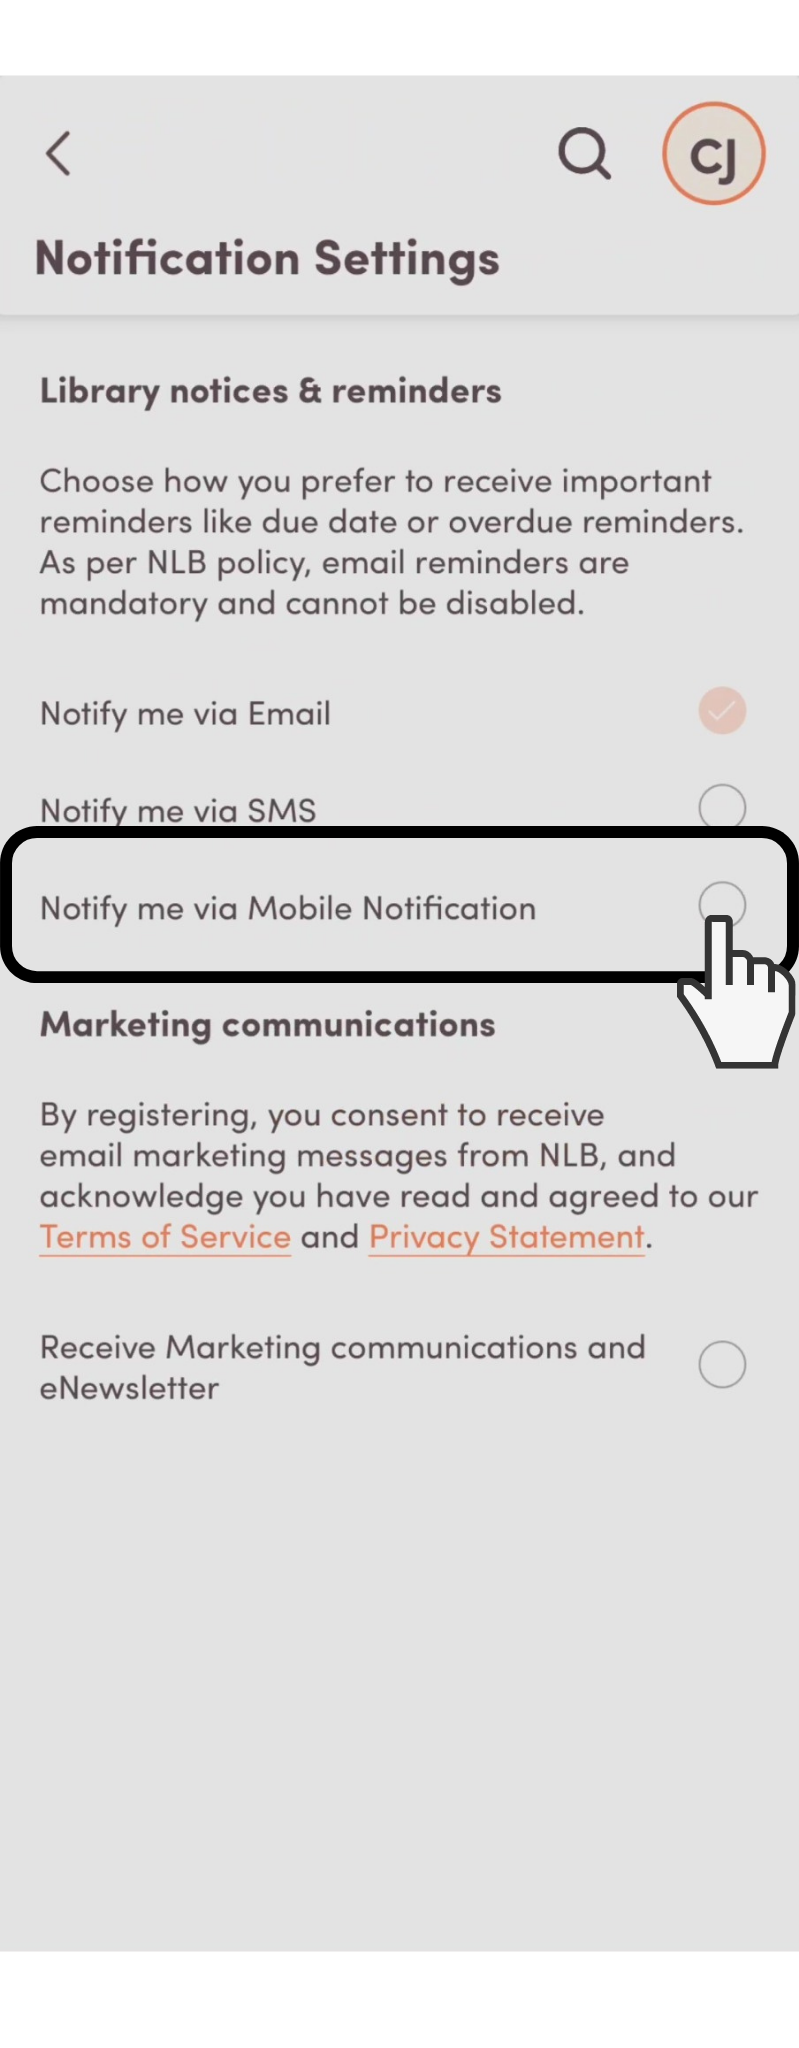 Step 5 of mobile notification setting